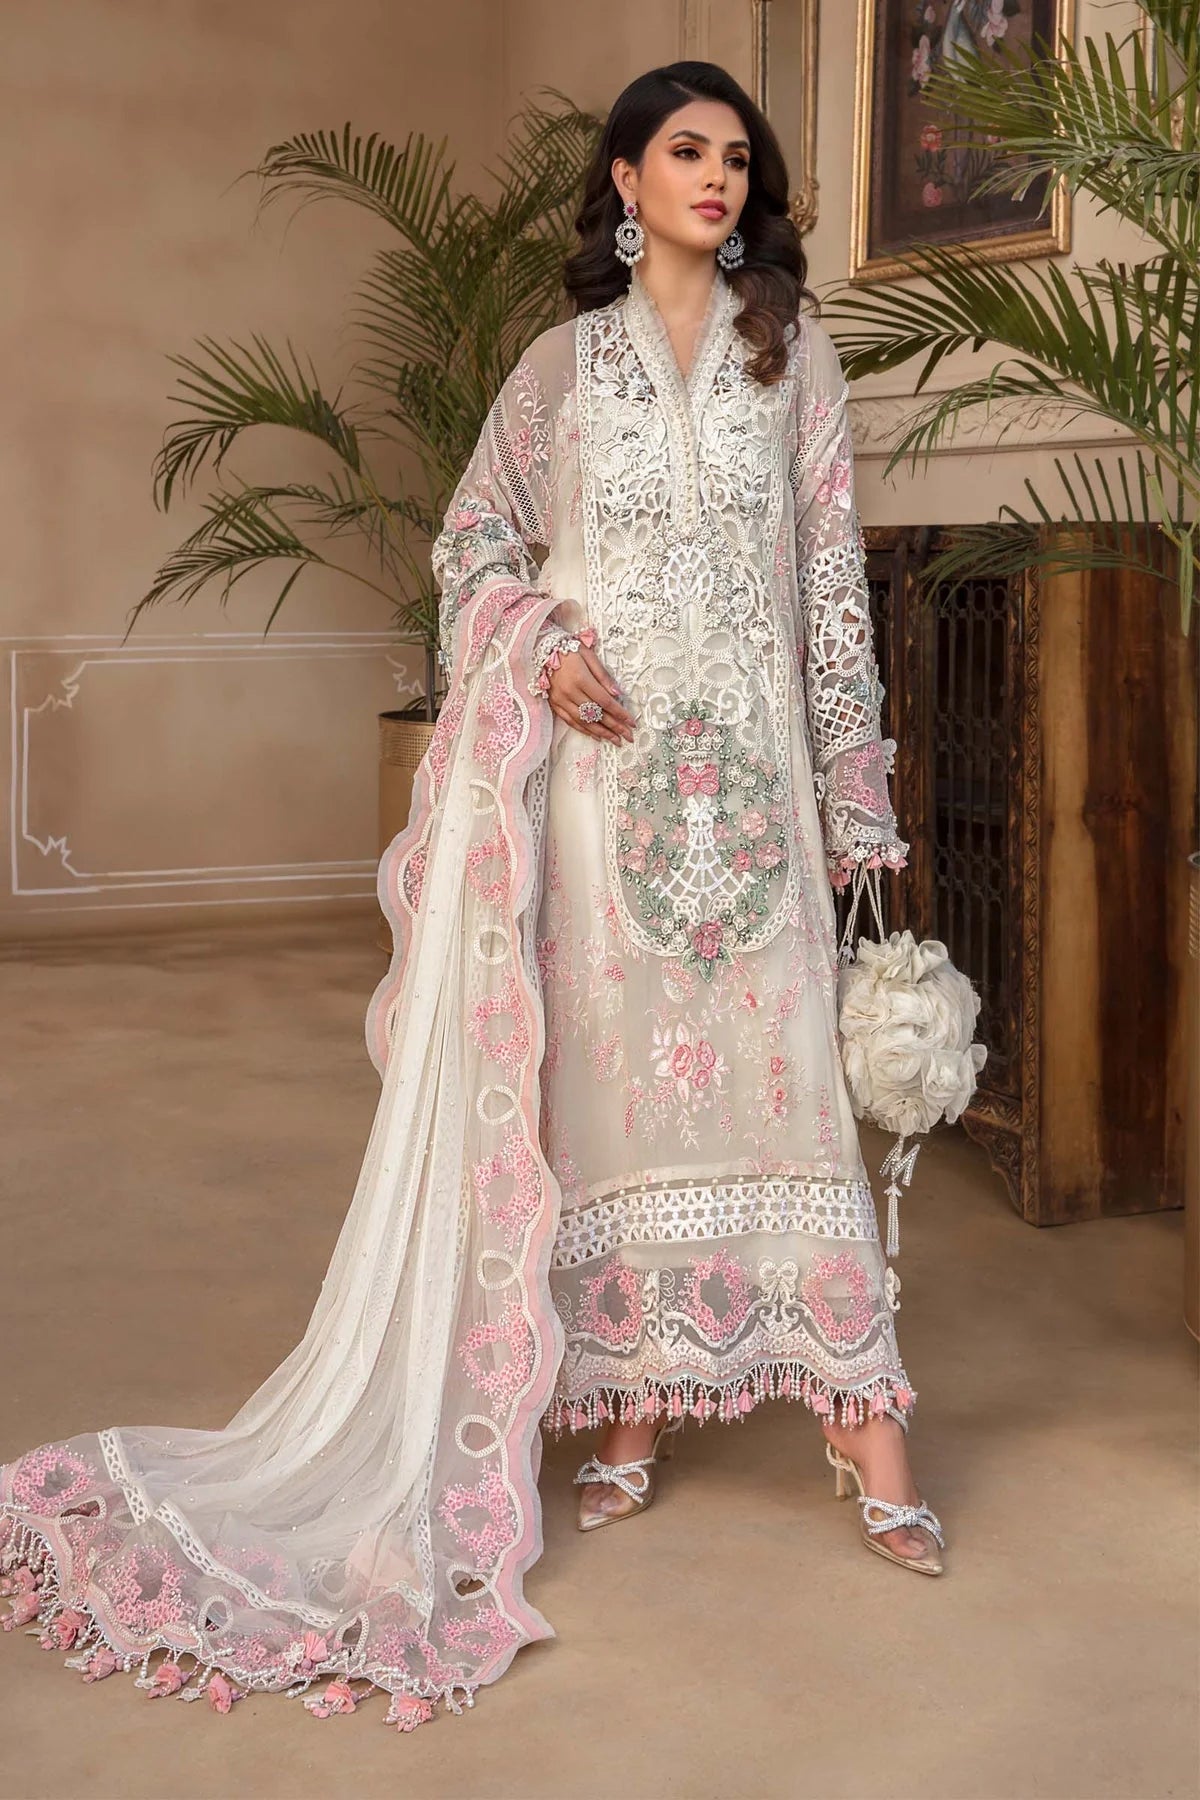 Maria B Inspired Mbroidered Off White 3 Piece Wedding Outfit - Desi Posh